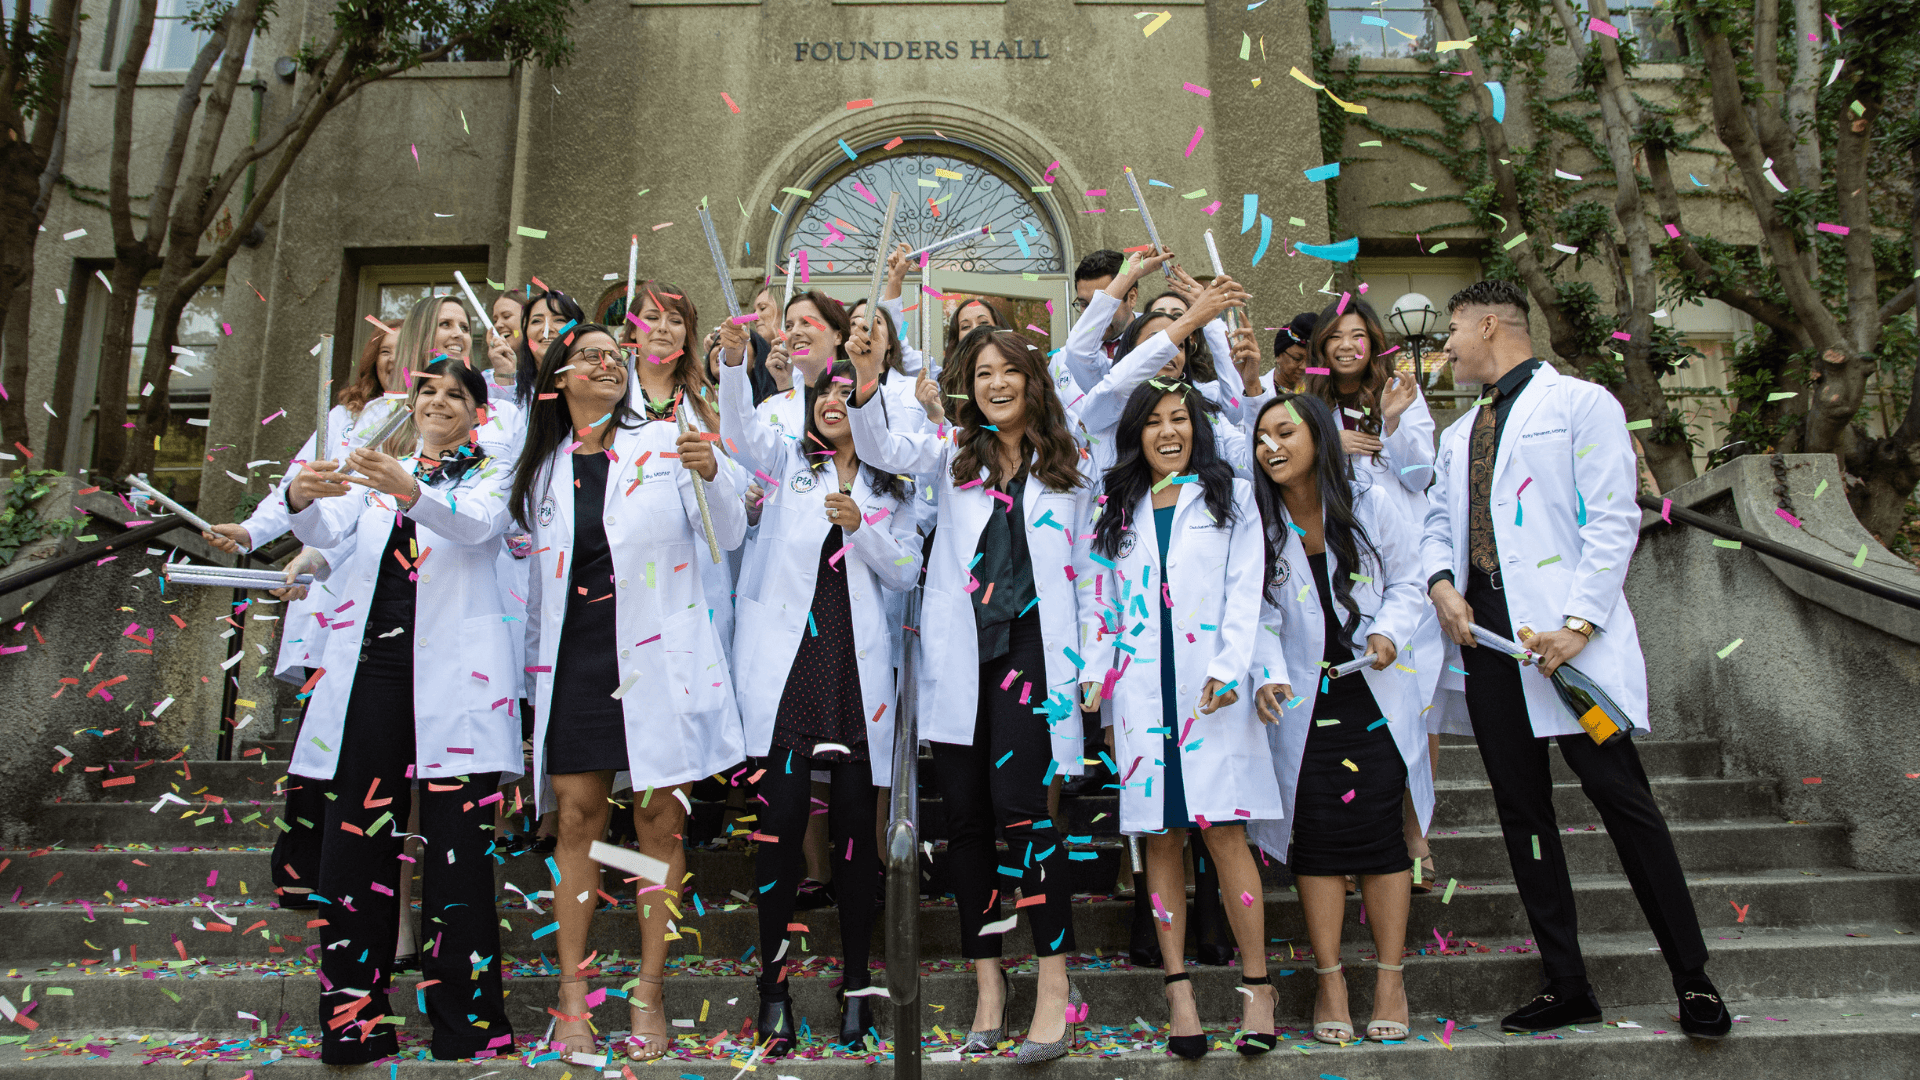 Physician Assistant Program Graduates on the steps of Founders Hall celebrating with confetti